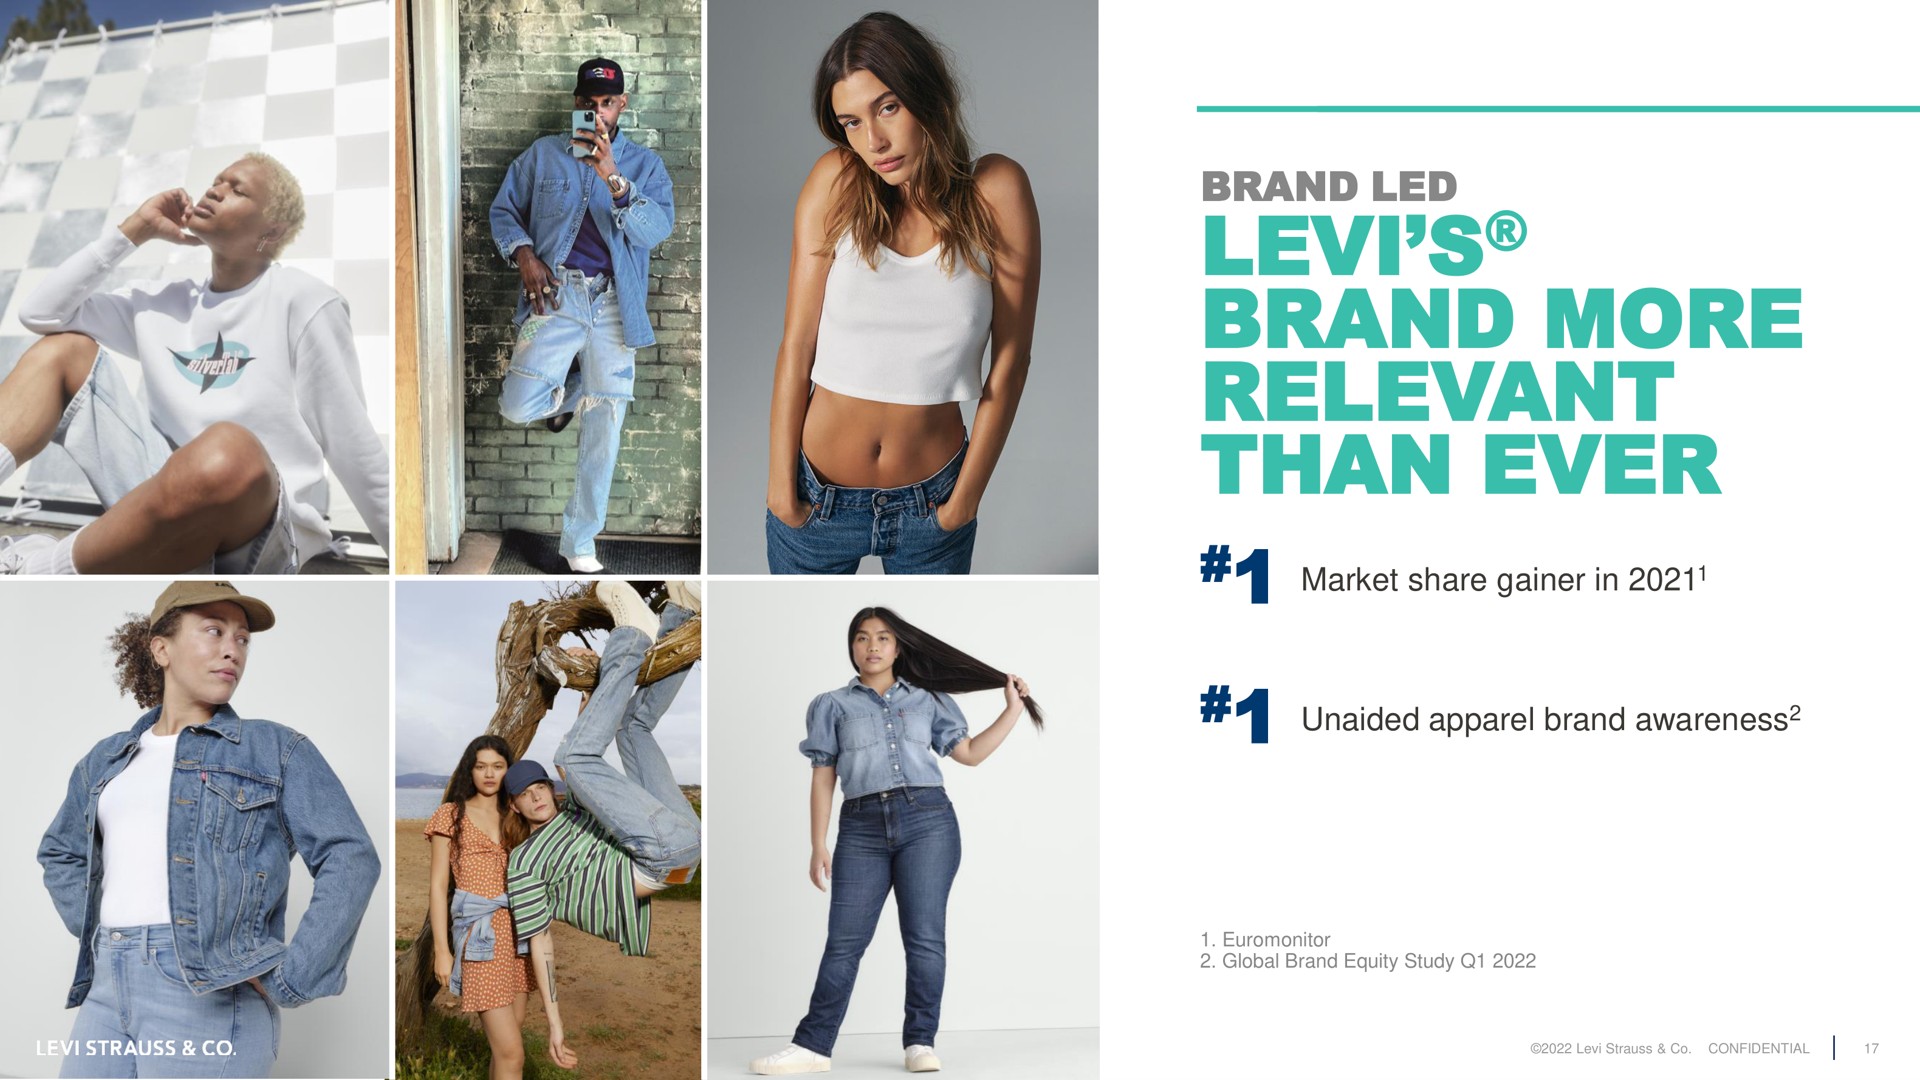 brand led brand more relevant than ever market share gainer in unaided apparel awareness | Levi Strauss